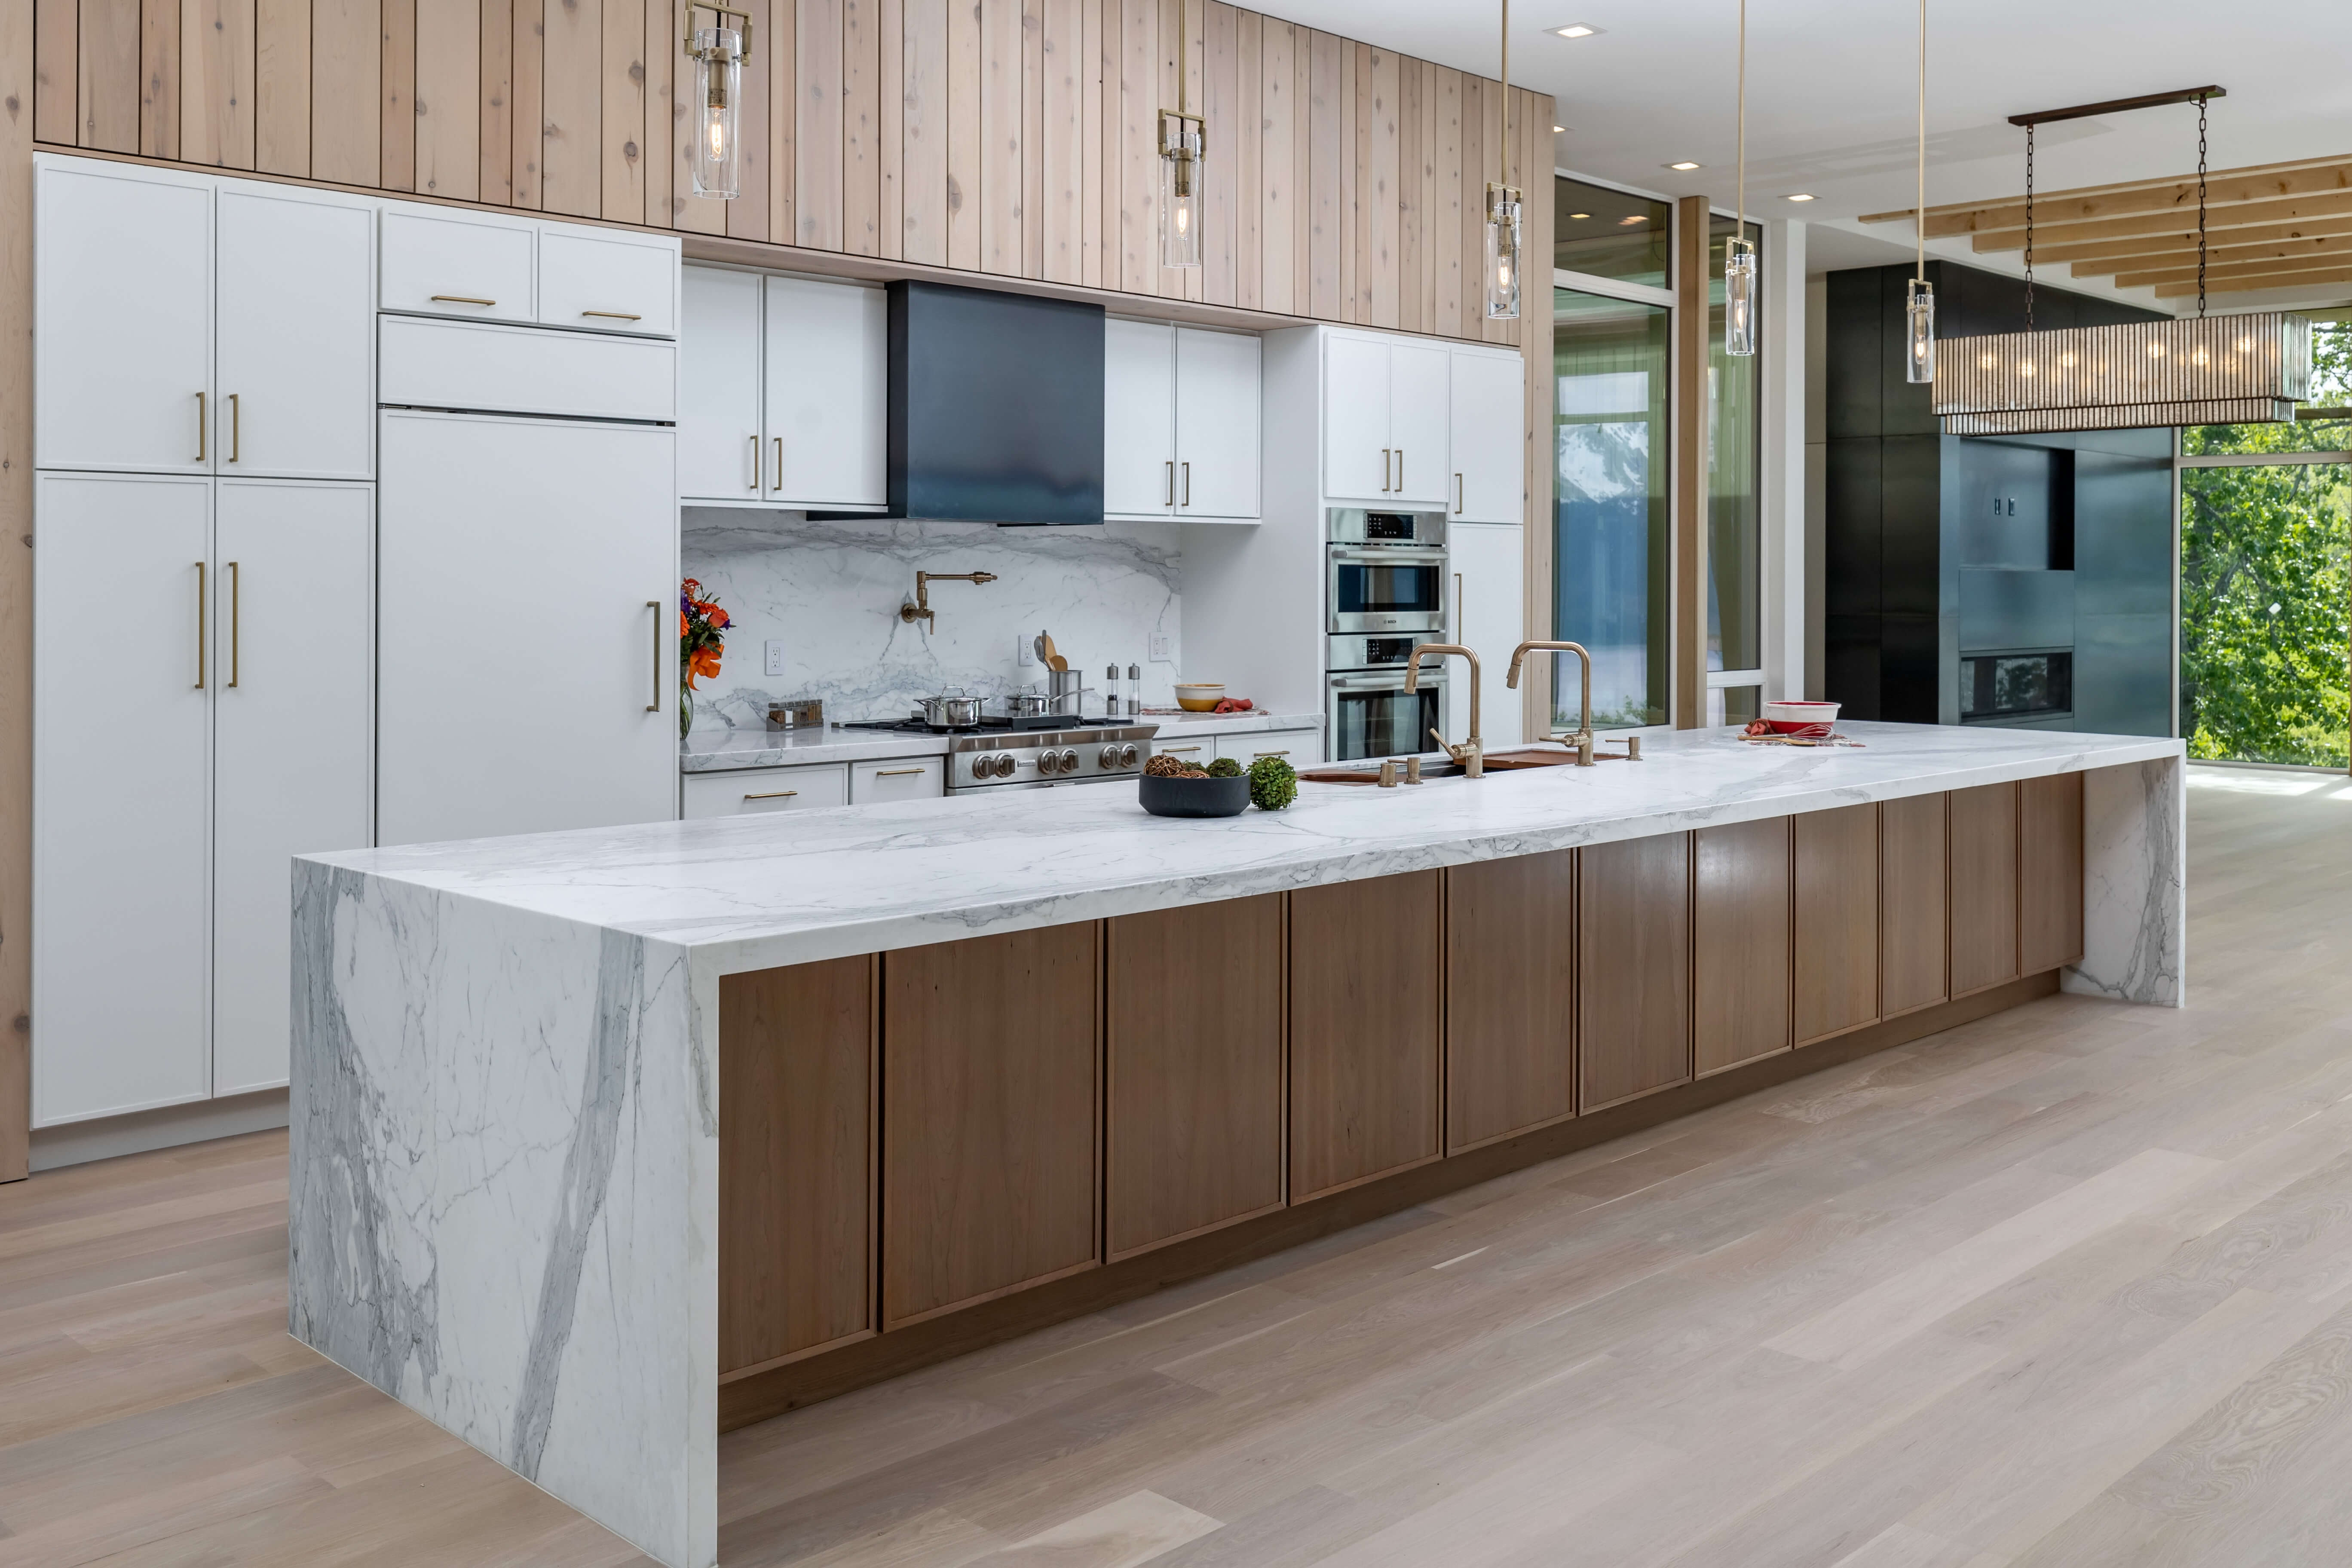 A warm and trendy kitchen design with a long kitchen island and paneled soffets above the cabinets.